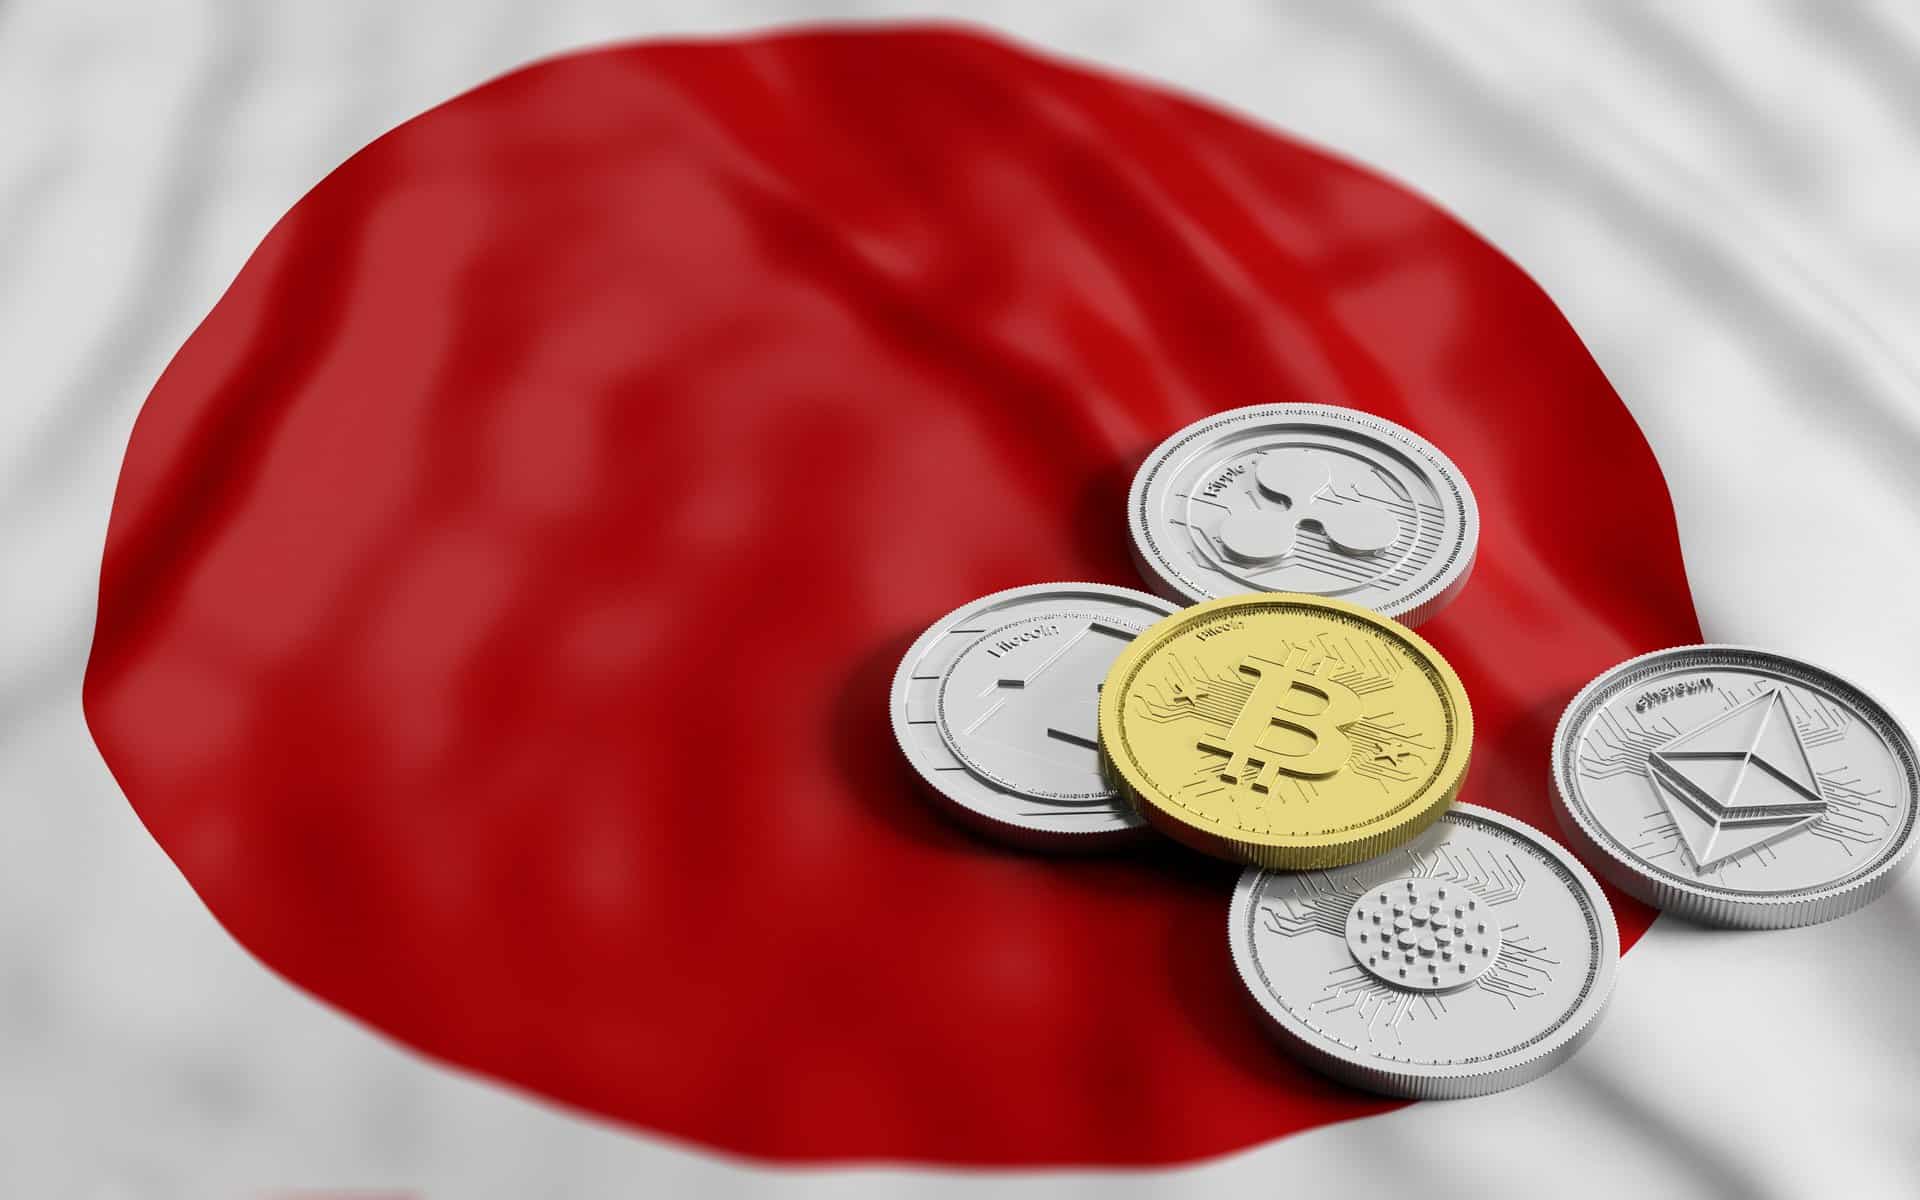 Japan’s New Law Might Assist in Taking Hold of Stolen Crypto